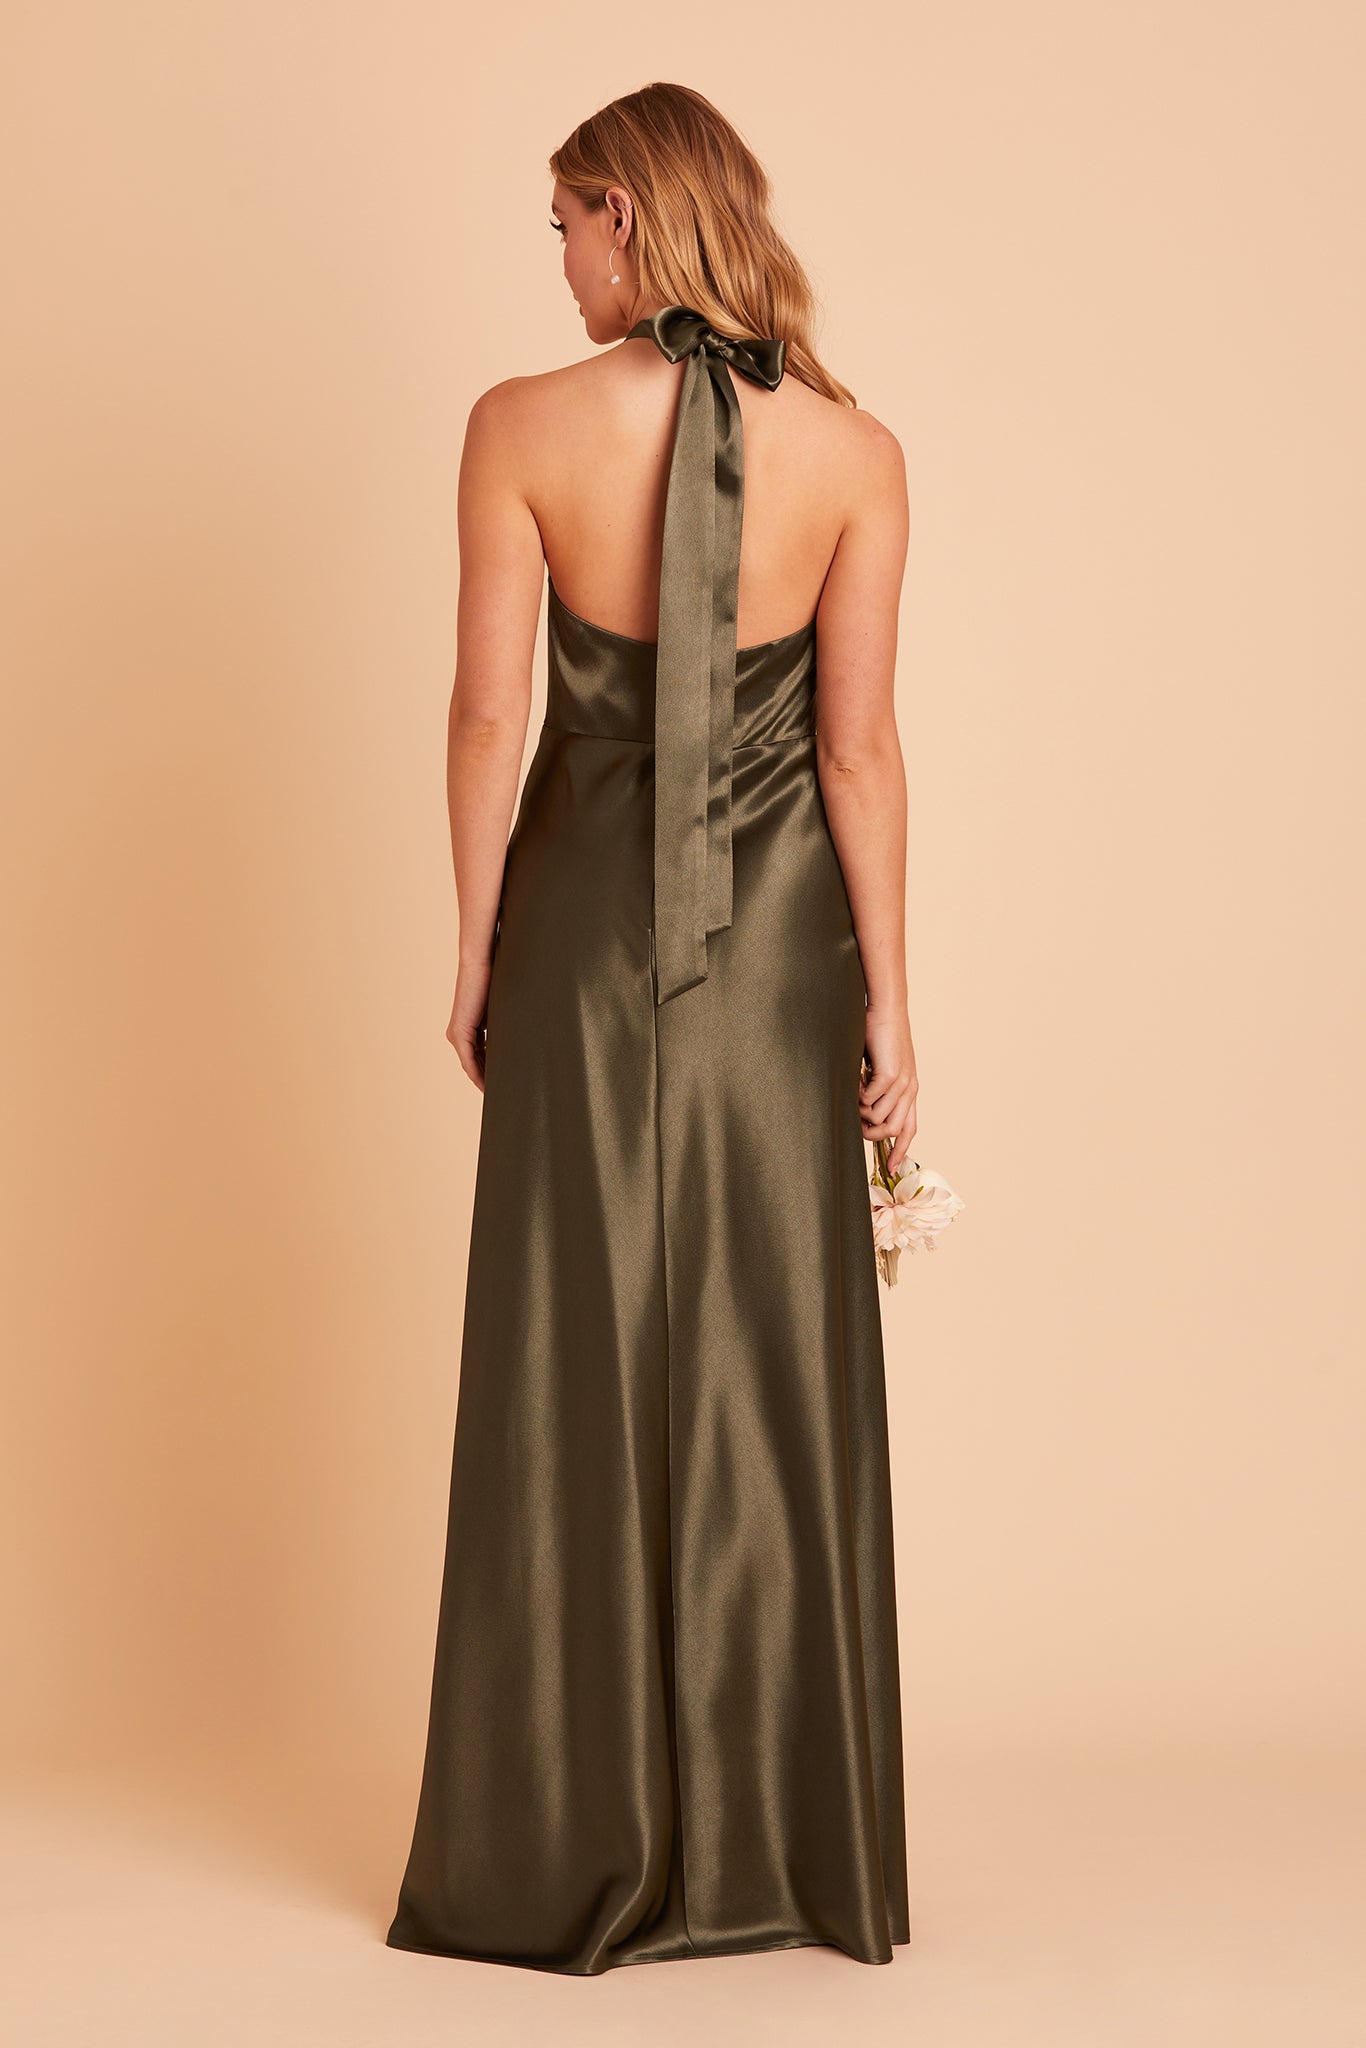 Monica bridesmaid dress with slit in olive satin by Birdy Grey, back view